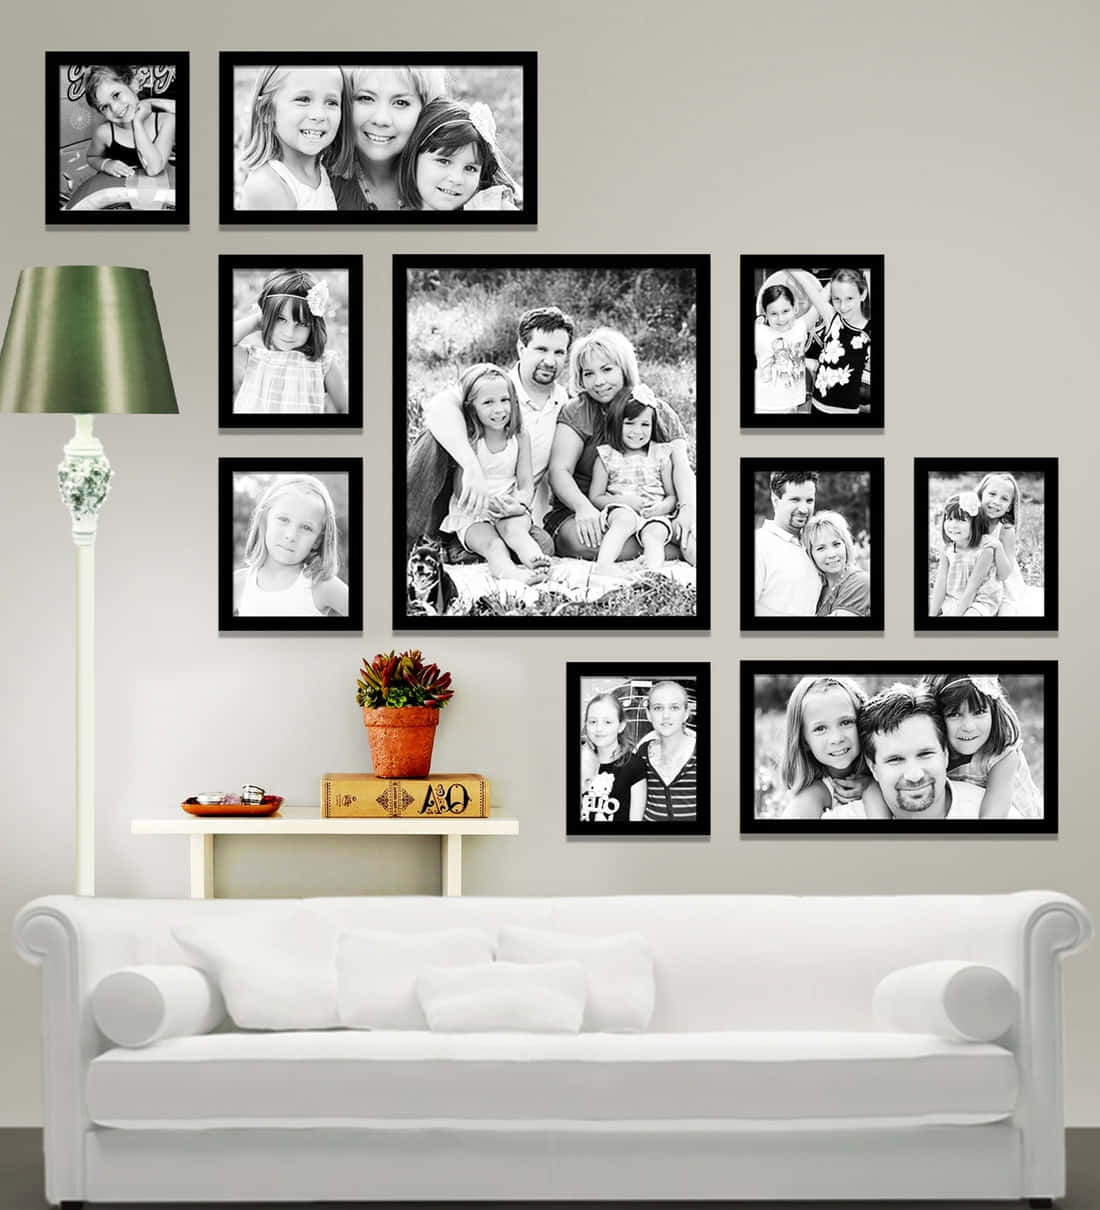 Transform Your Home with a Wall Collage